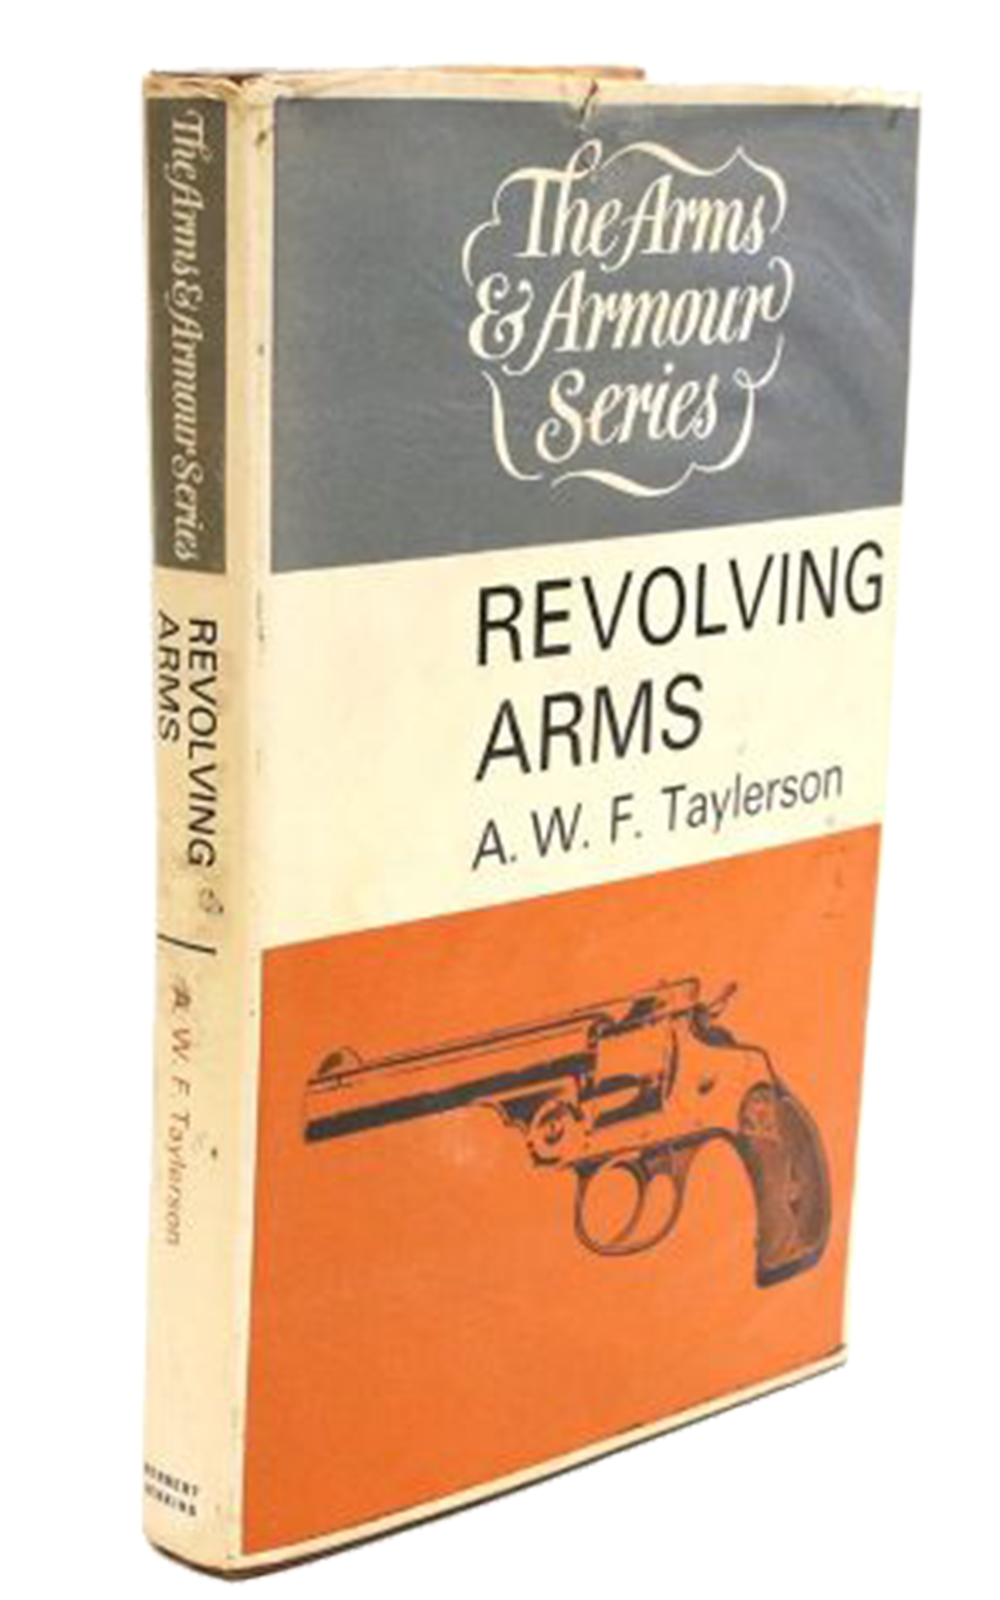 Revolving Arms By A W F Taylerson